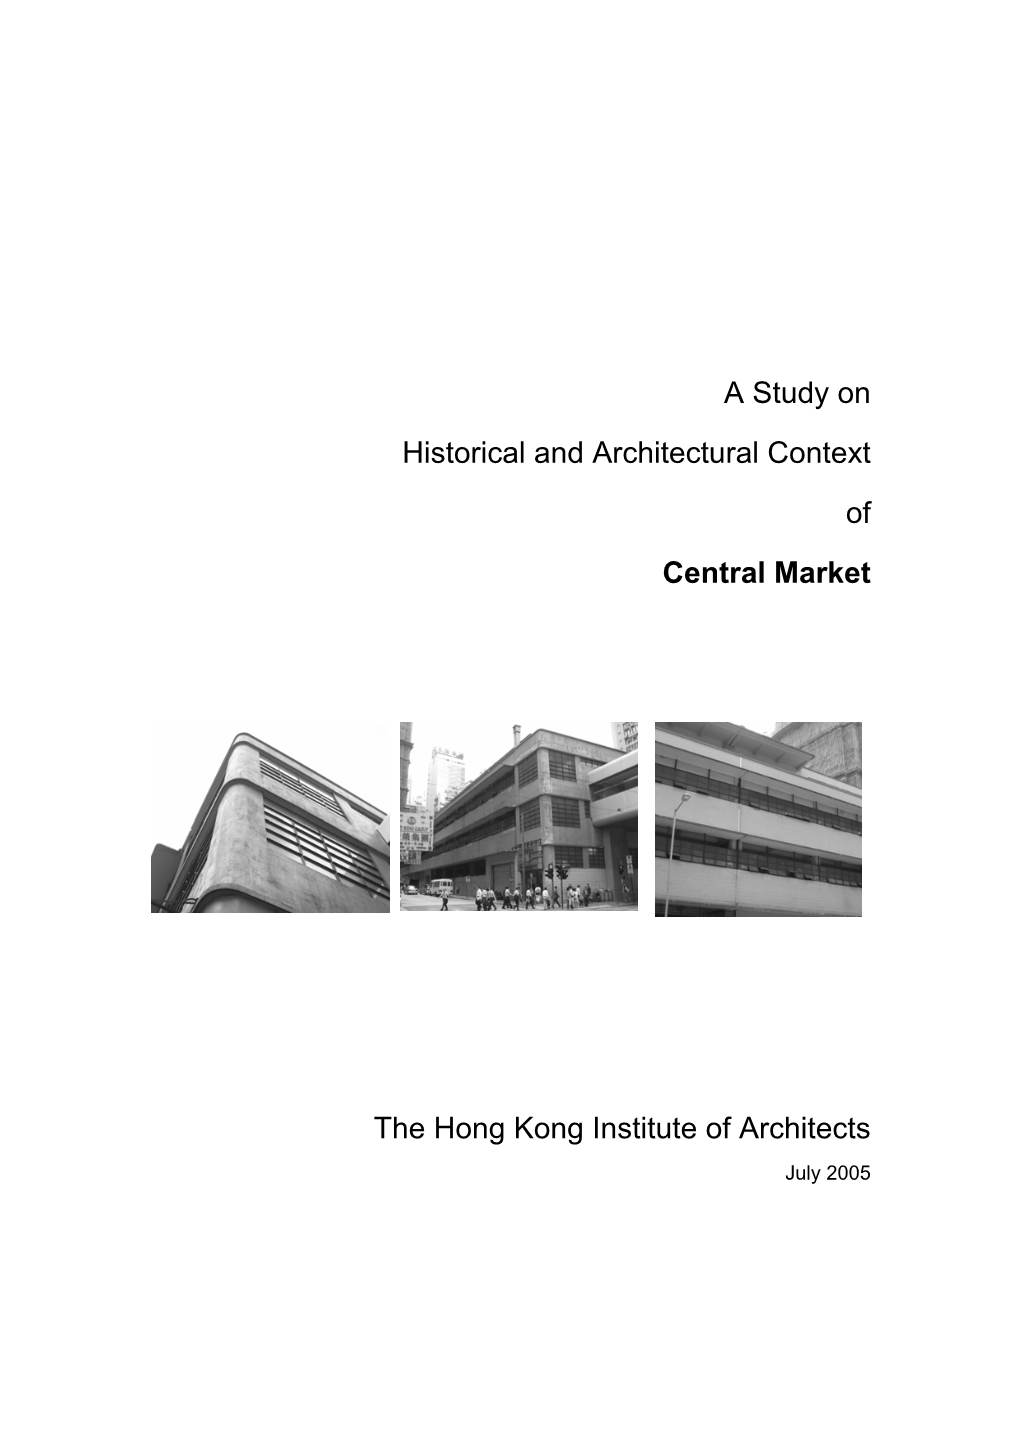 A Study on Historical and Architectural Context of Central Market The